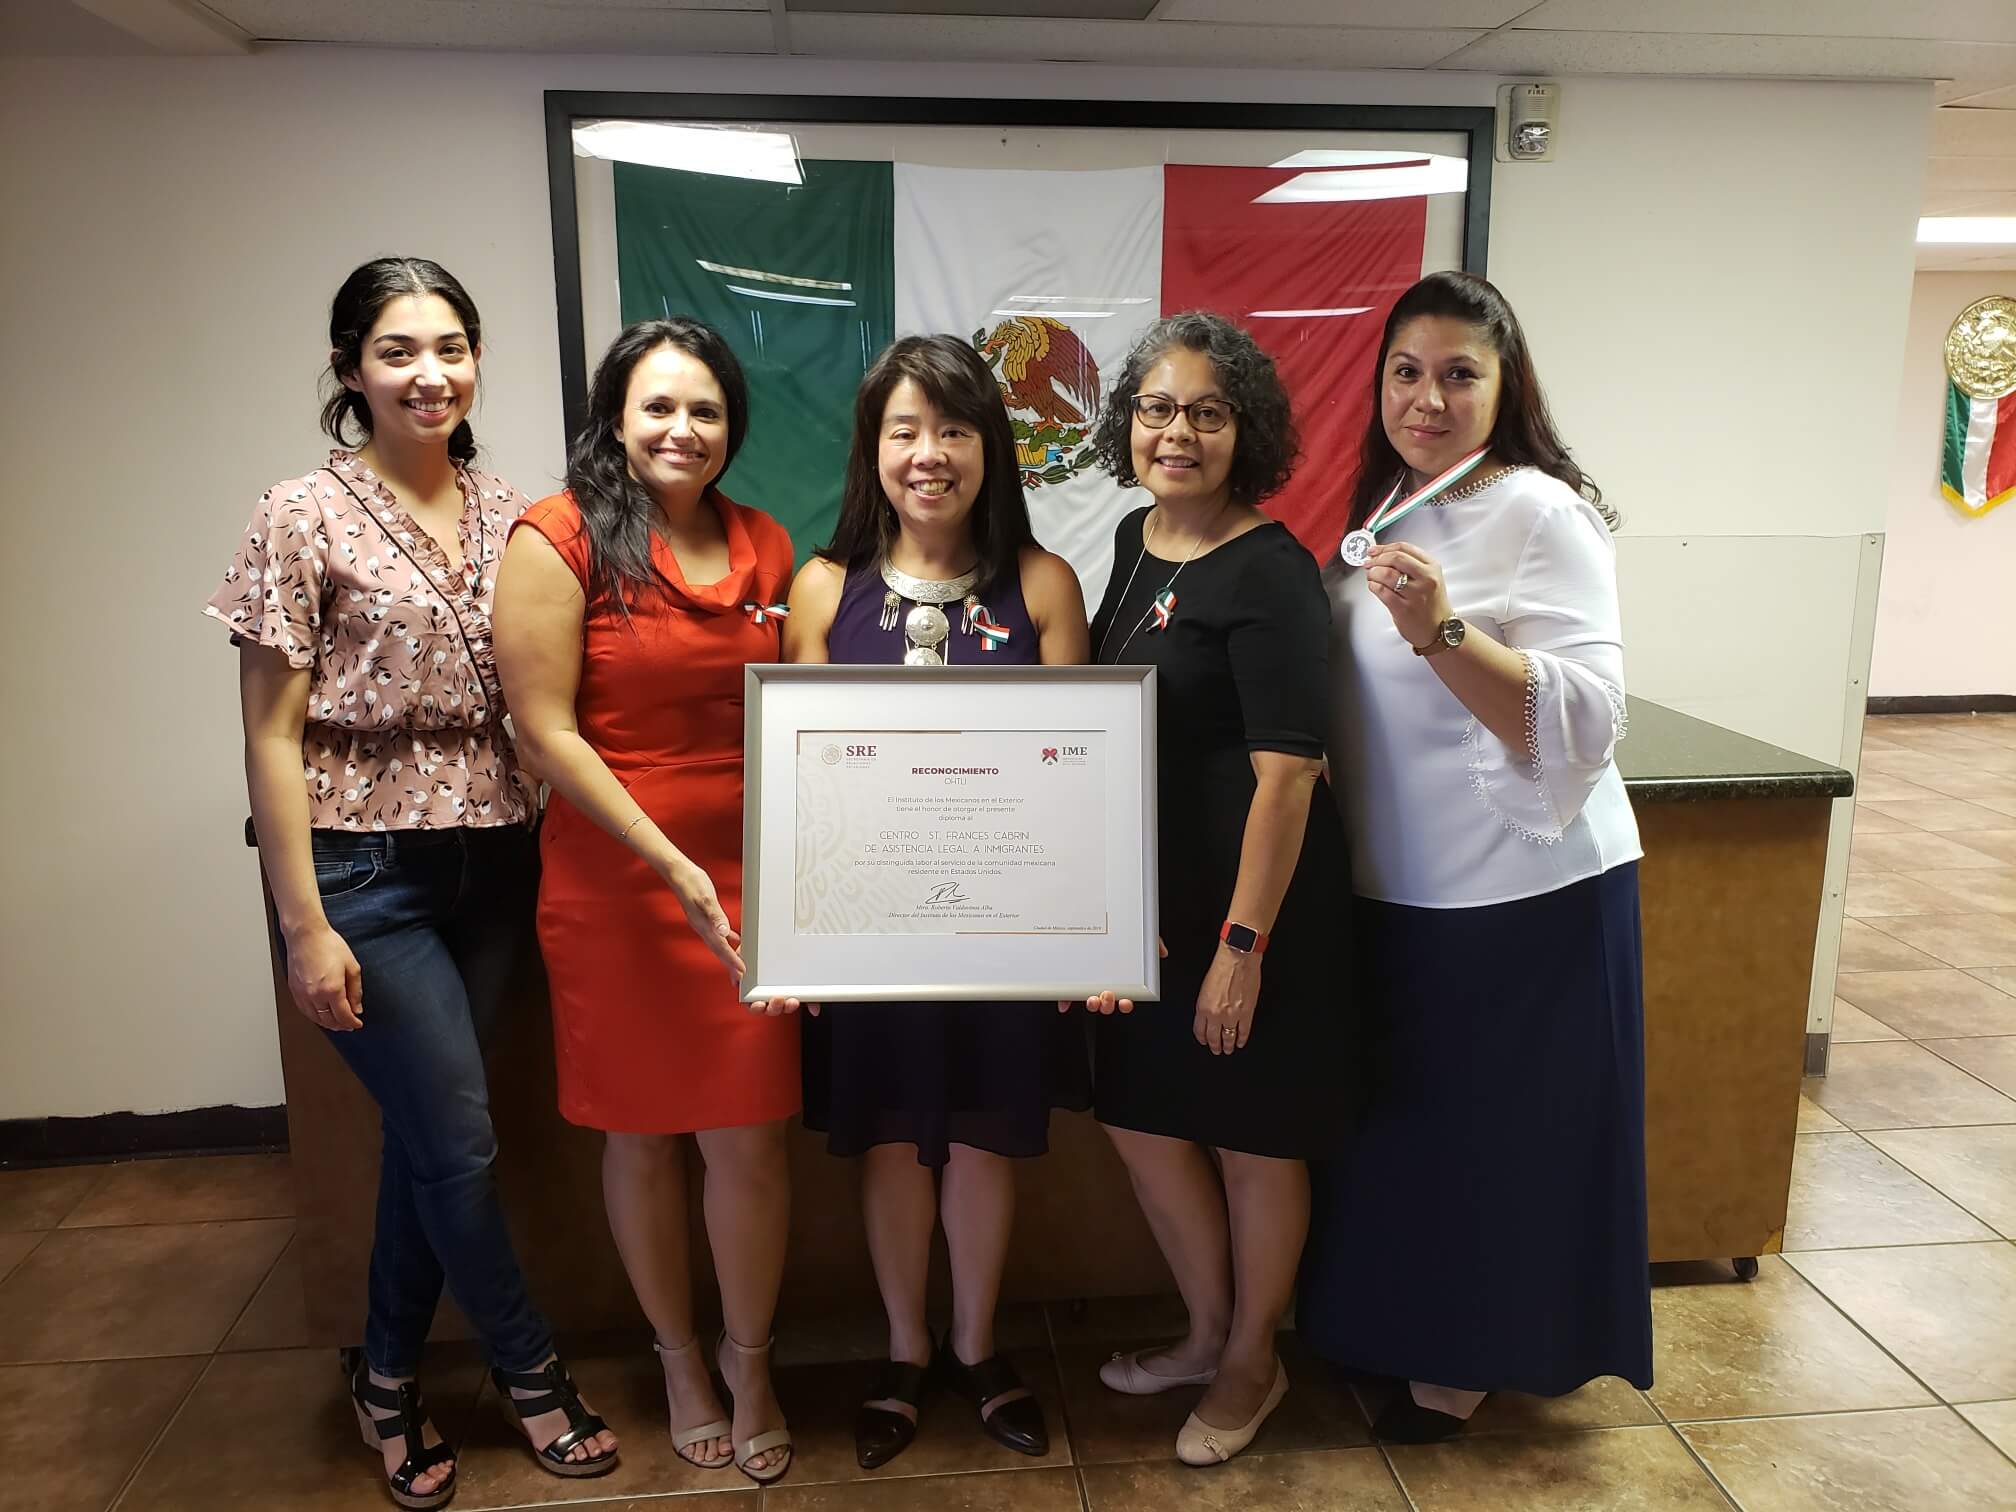 Ohtli Award presented to Catholic Charities' Cabrini Center by the Mexican Consulate